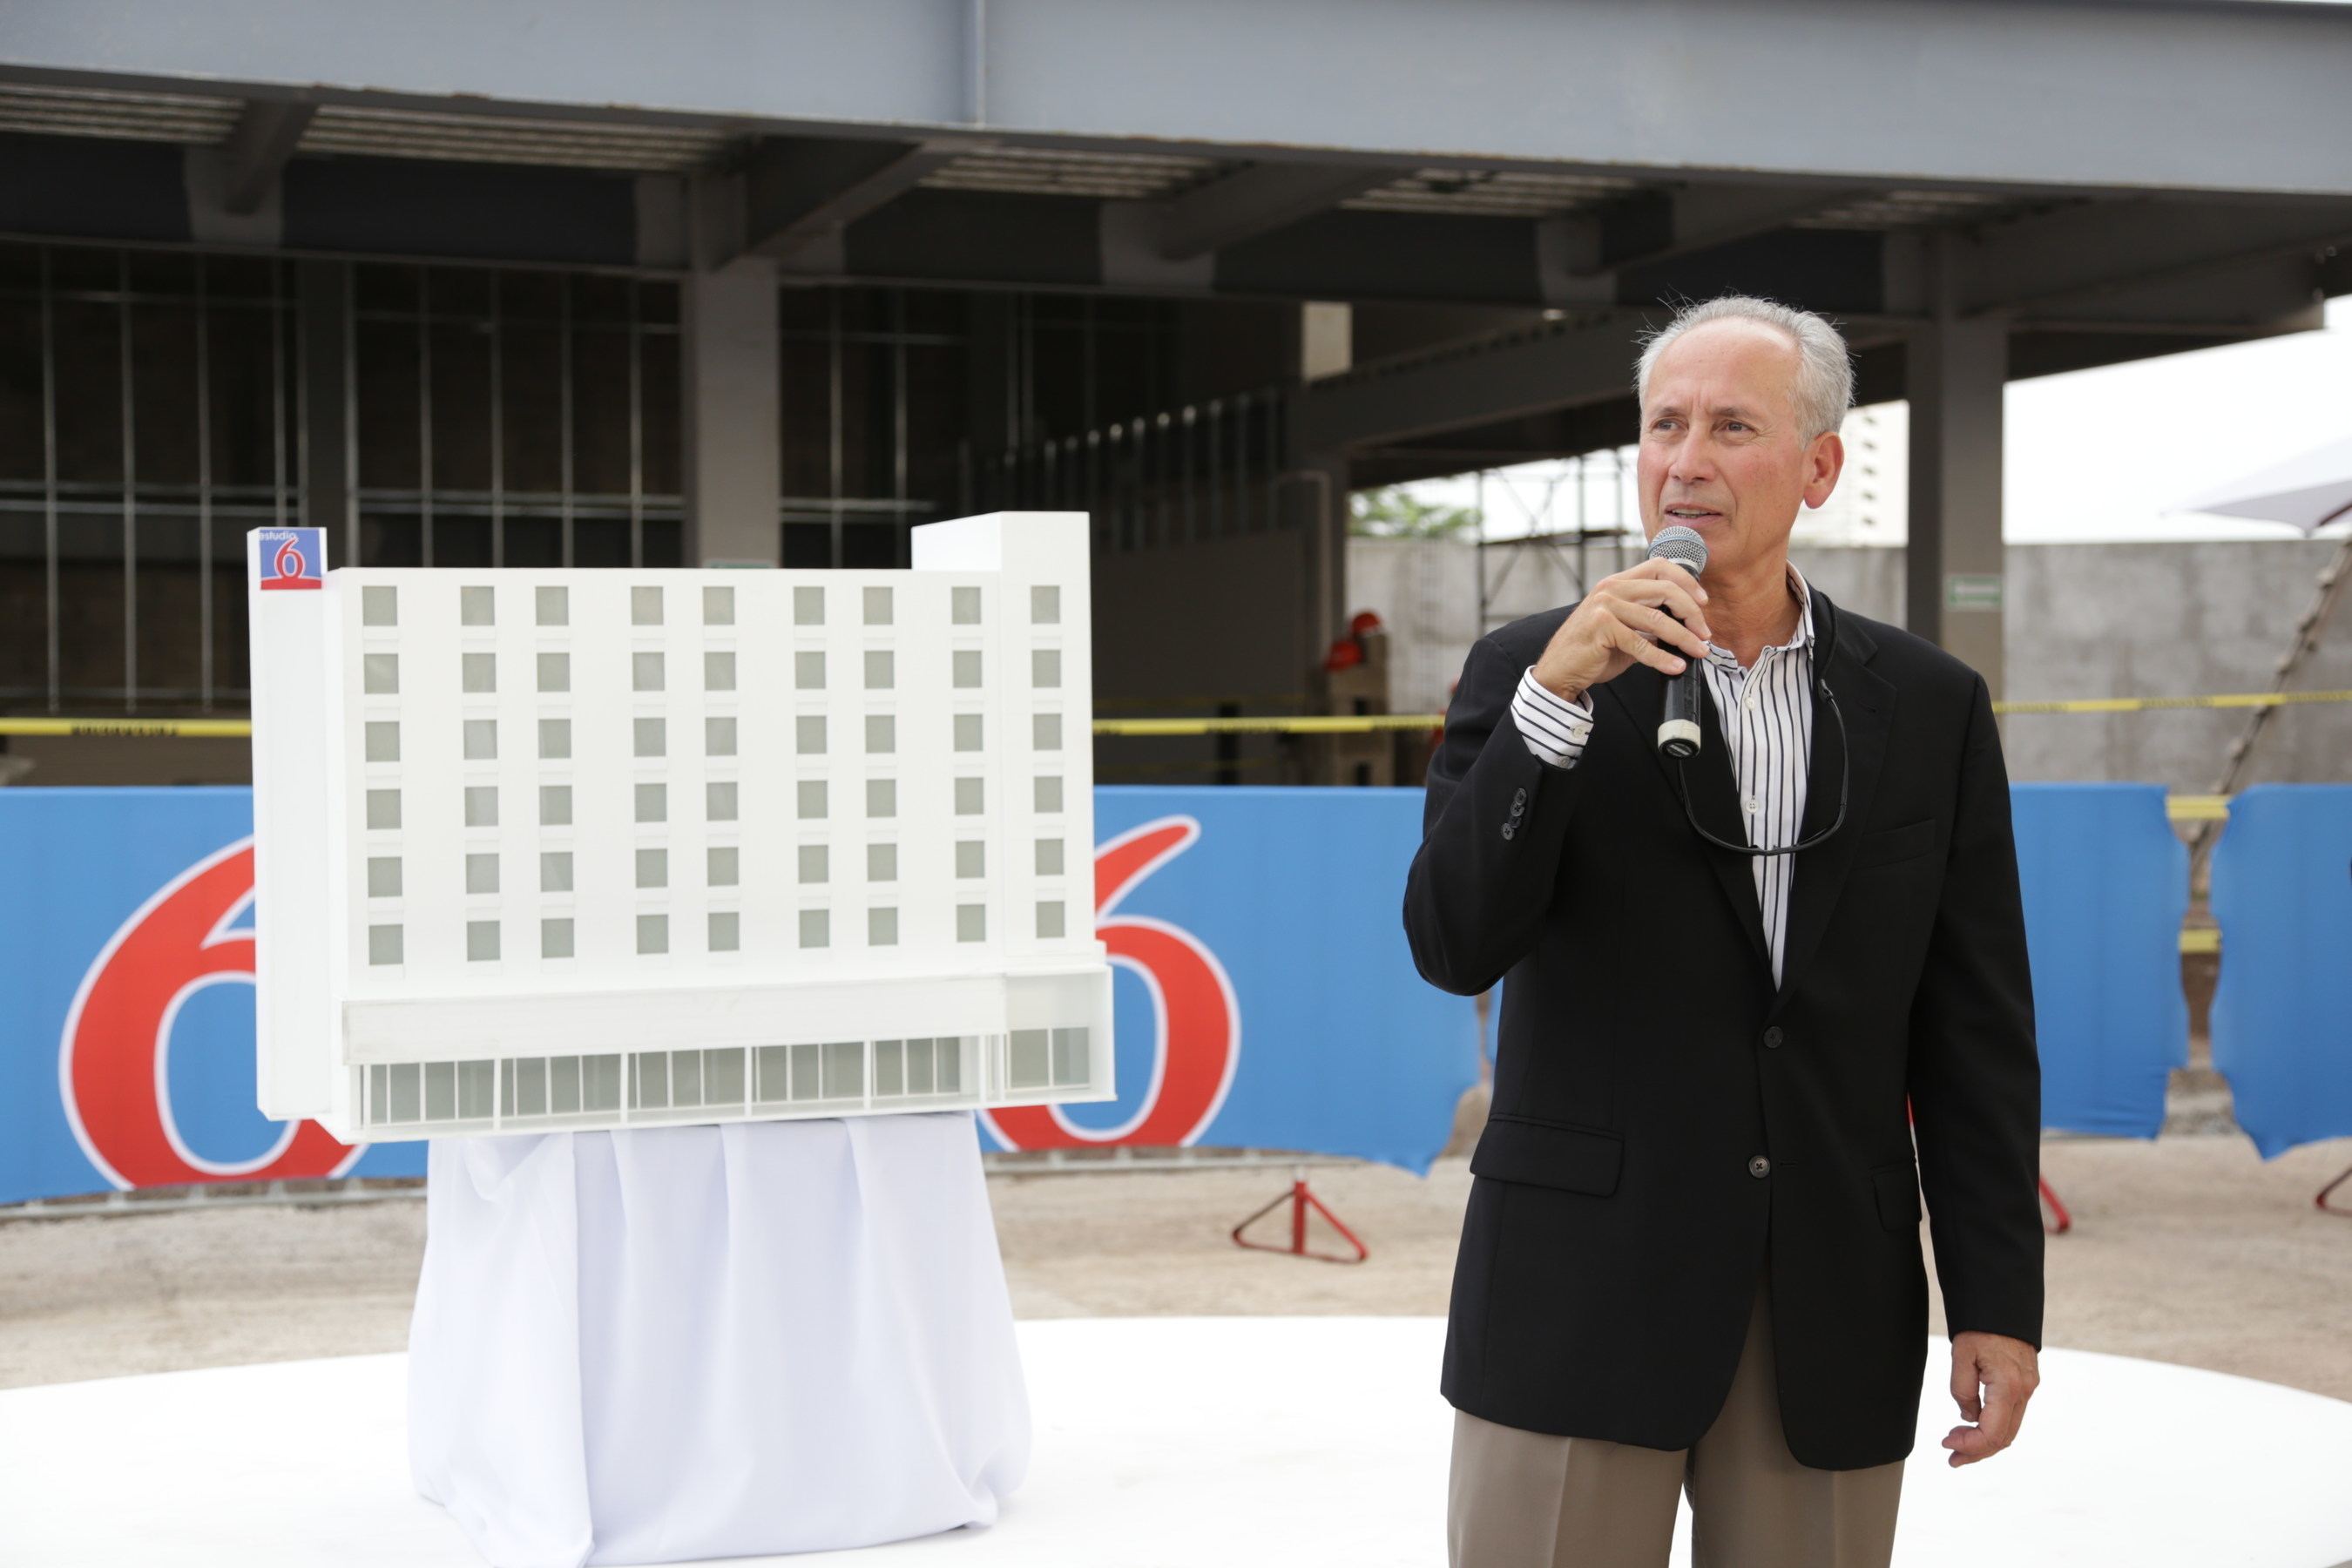 Jim Amorosia, President and CEO, G6 Hospitality during the ground breaking ceremony of the brand's second Estudio 6 located in Puerto Vallarta, Jalisco Mexico.